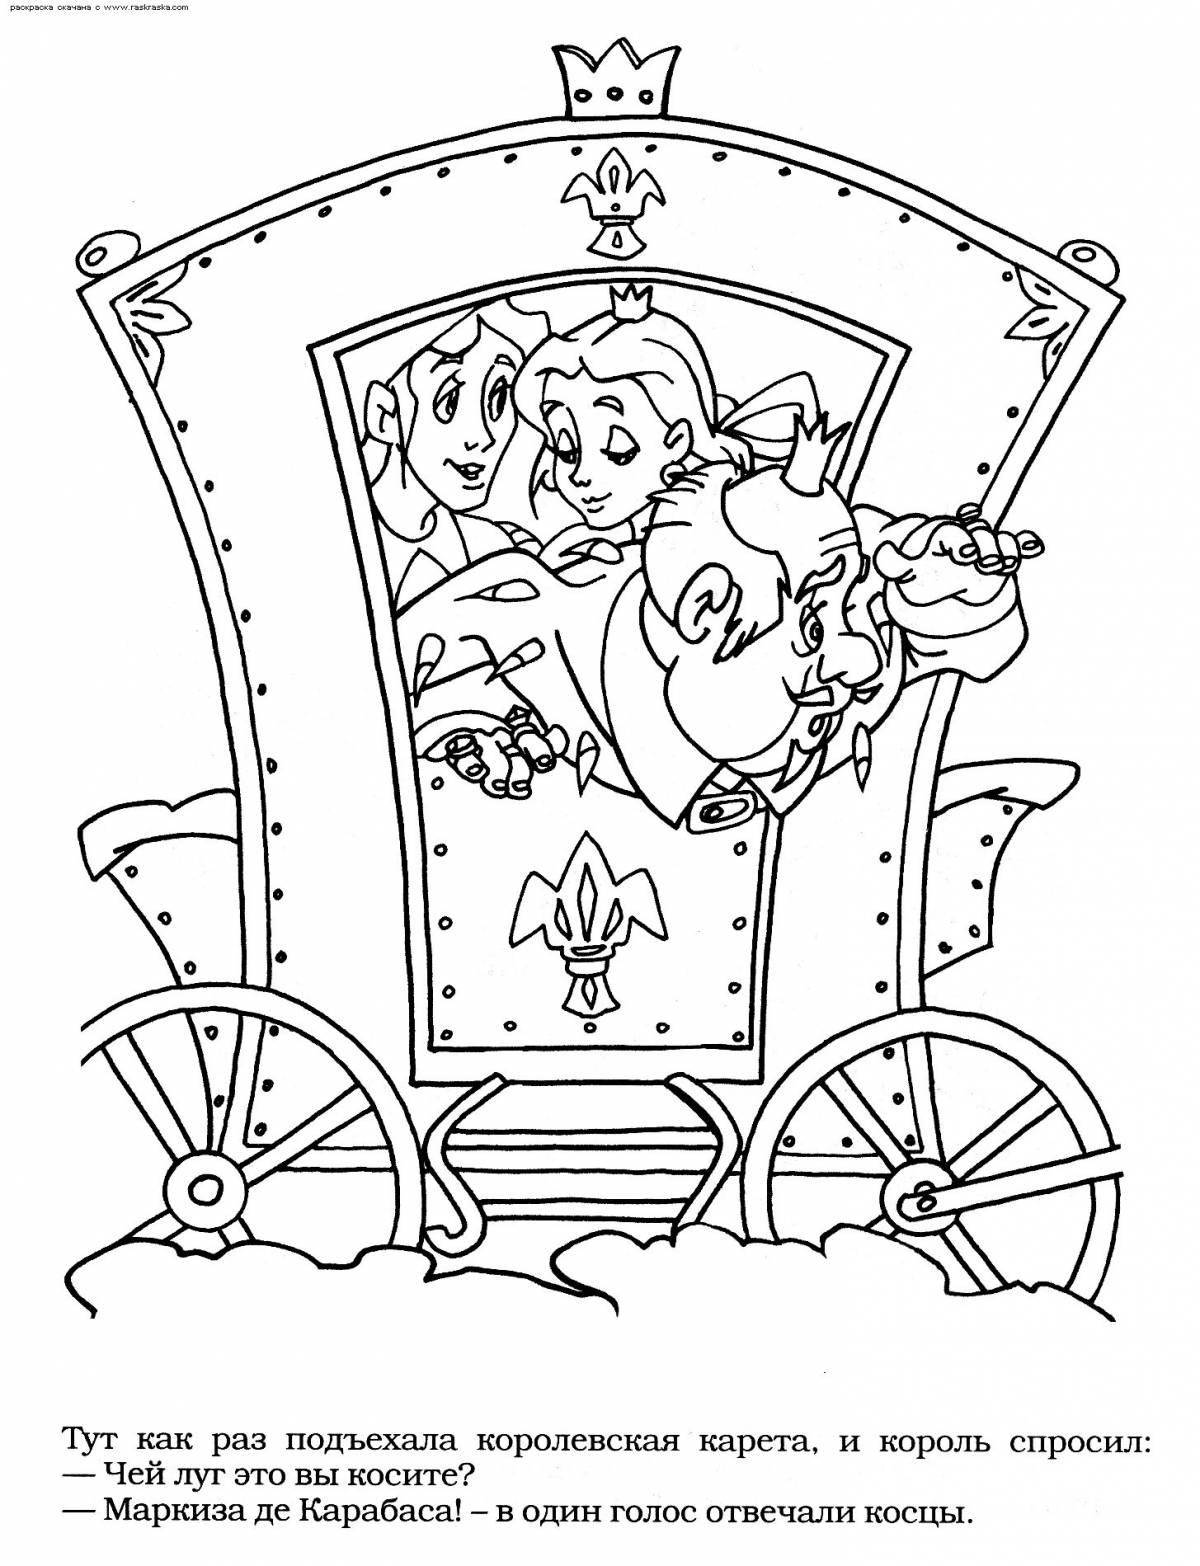 Coloring page royal princess in a carriage